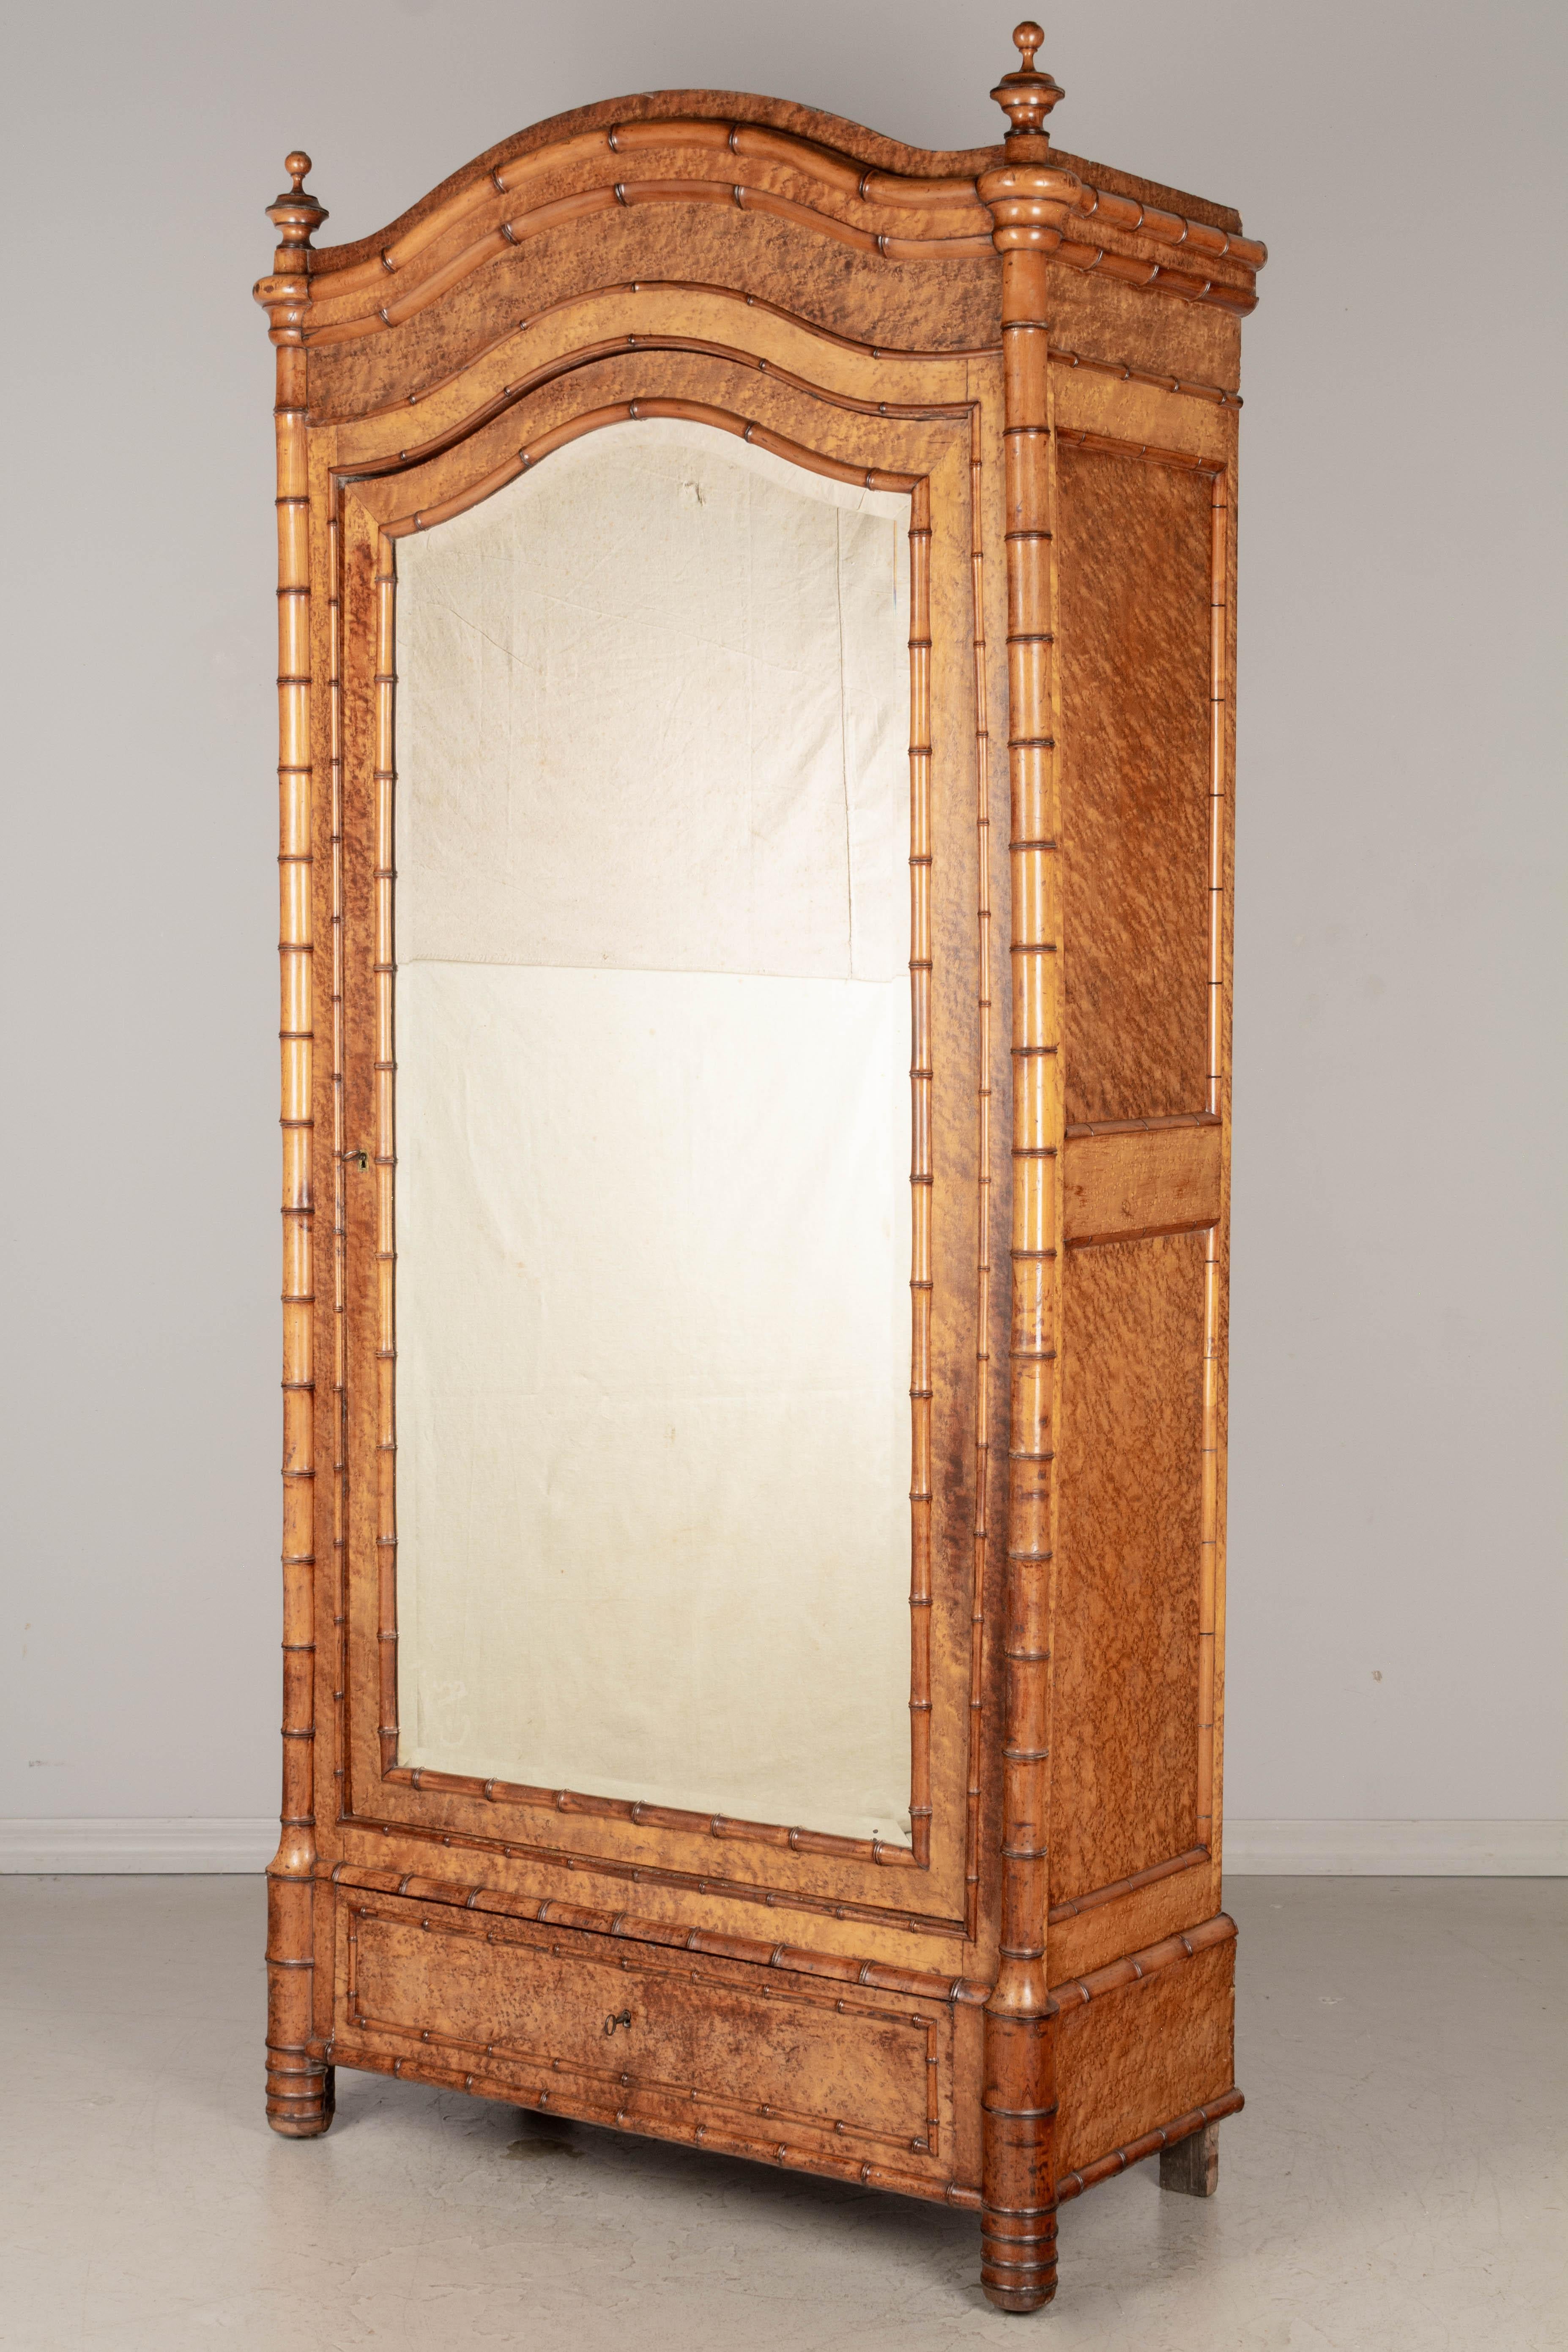 Hand-Crafted 19th Century French Faux Bamboo Armoire or Wardrobe